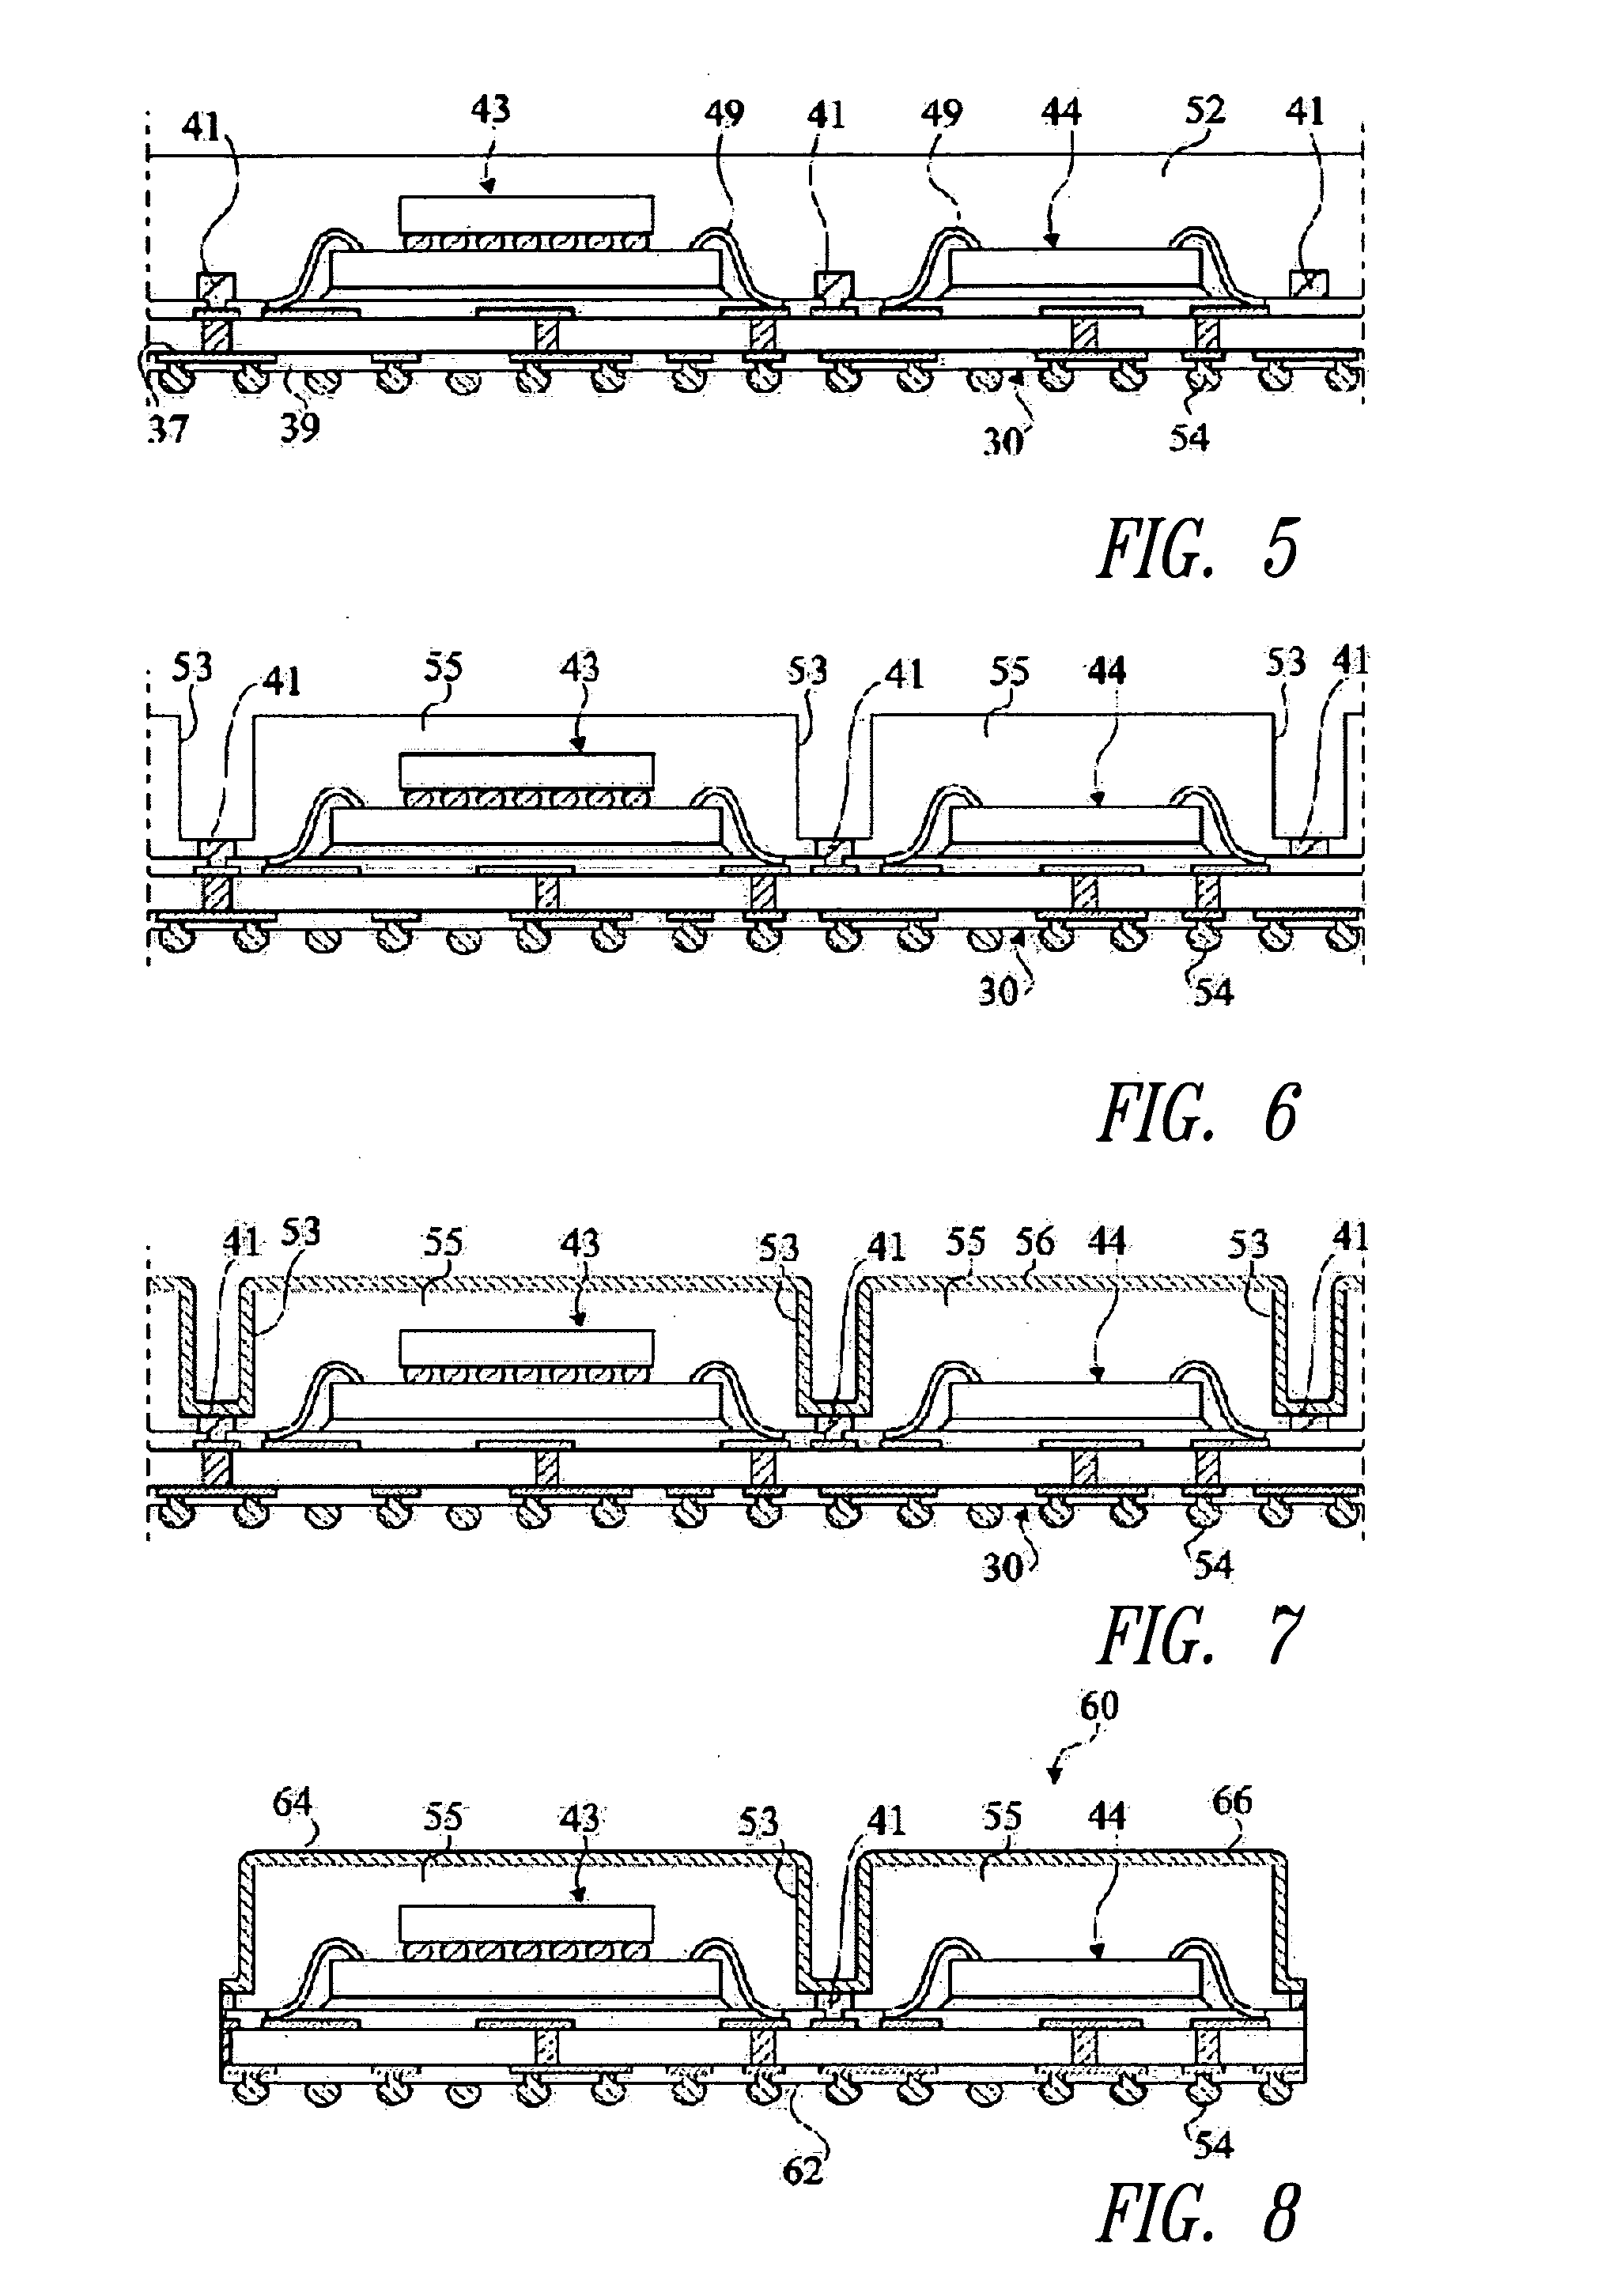 Electronic circuit protection device